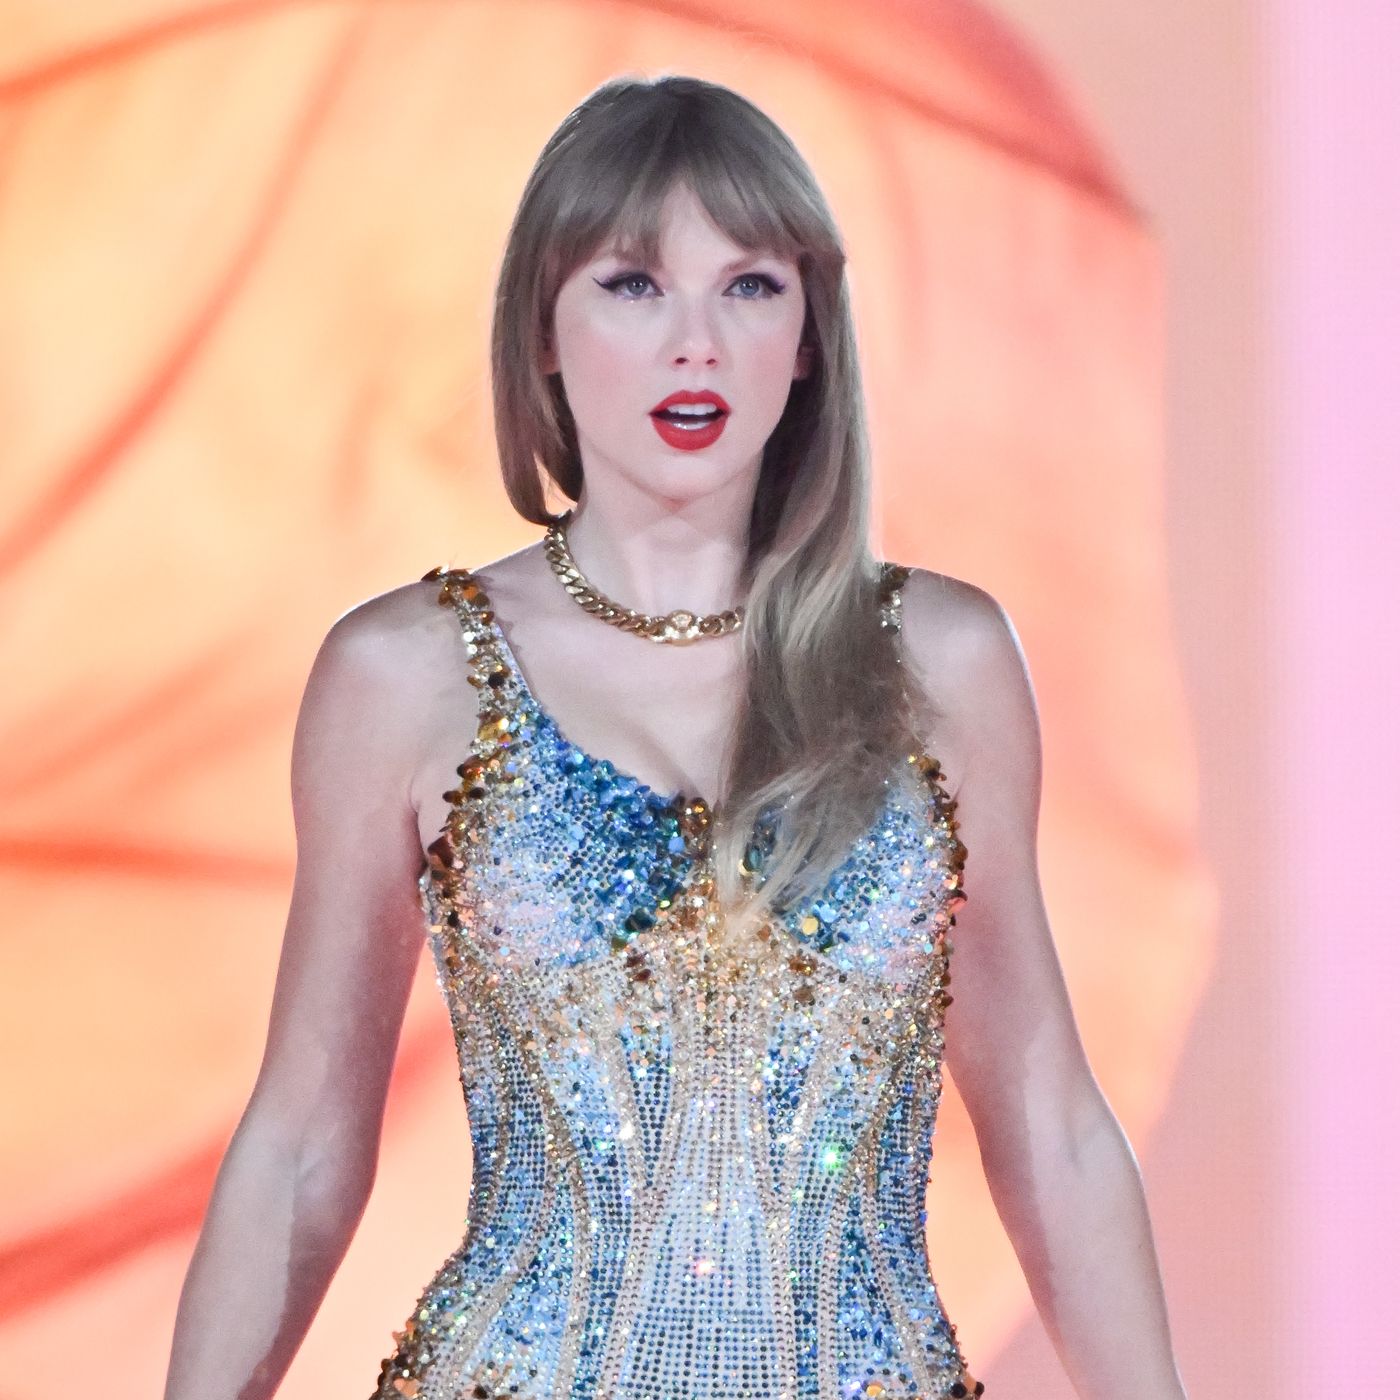 Taylor Swift Releases New Versions Of 'Cruel Summer', Names Four